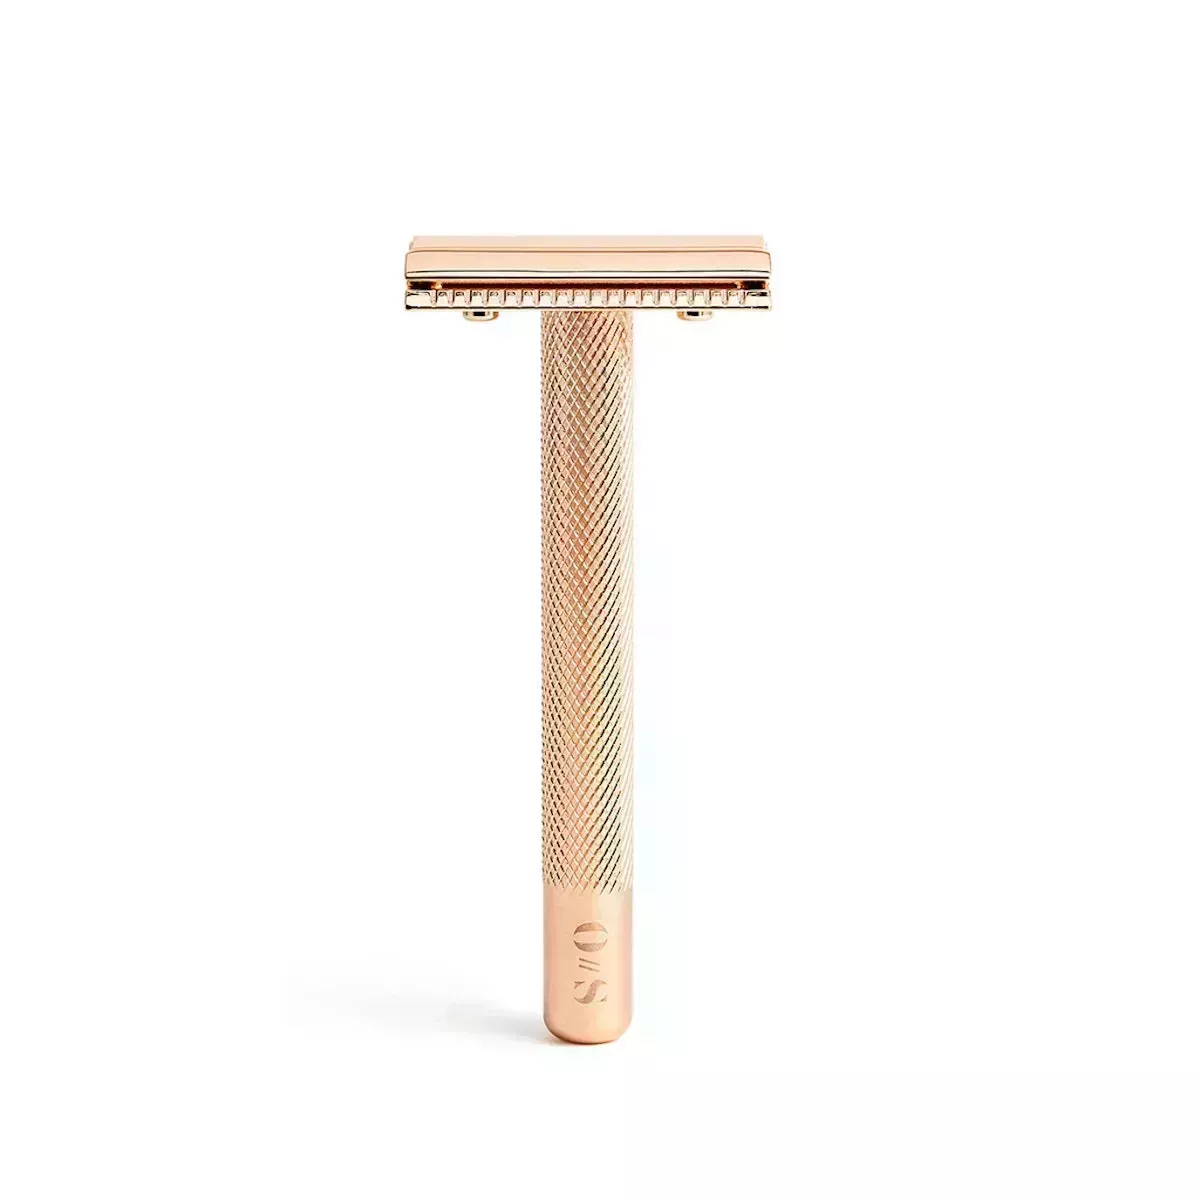 Oui the People Sensitive Skin Razor in Rose Gold on white background